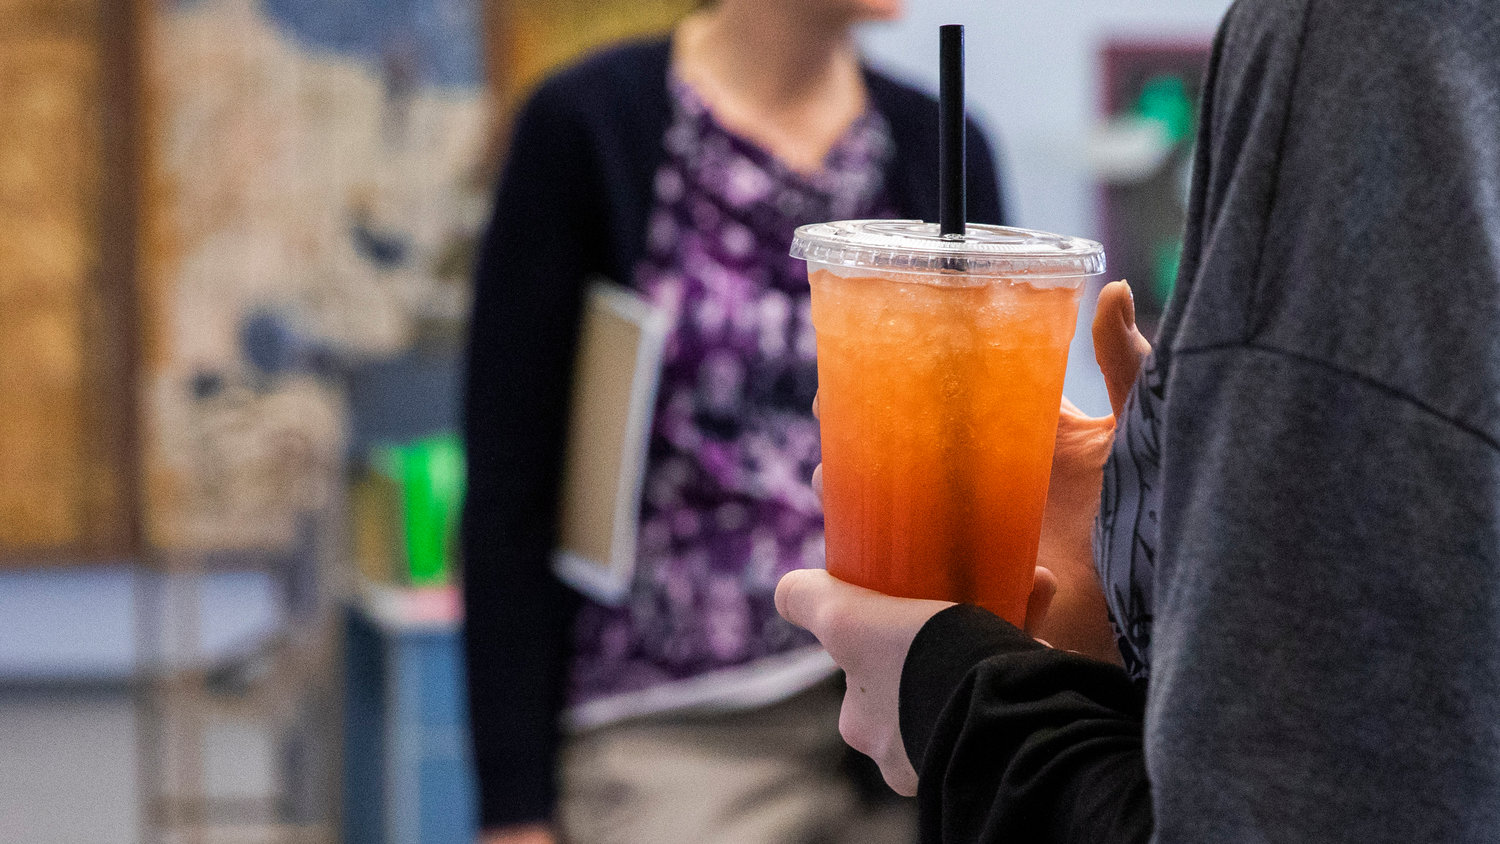 Students at W.F. West High School hold drinks and wait for friends after a ribbon cutting ceremony on Wednesday at a new student store "The Crimson & Gray," powered by Lewis County Coffee Co. in Chehalis.